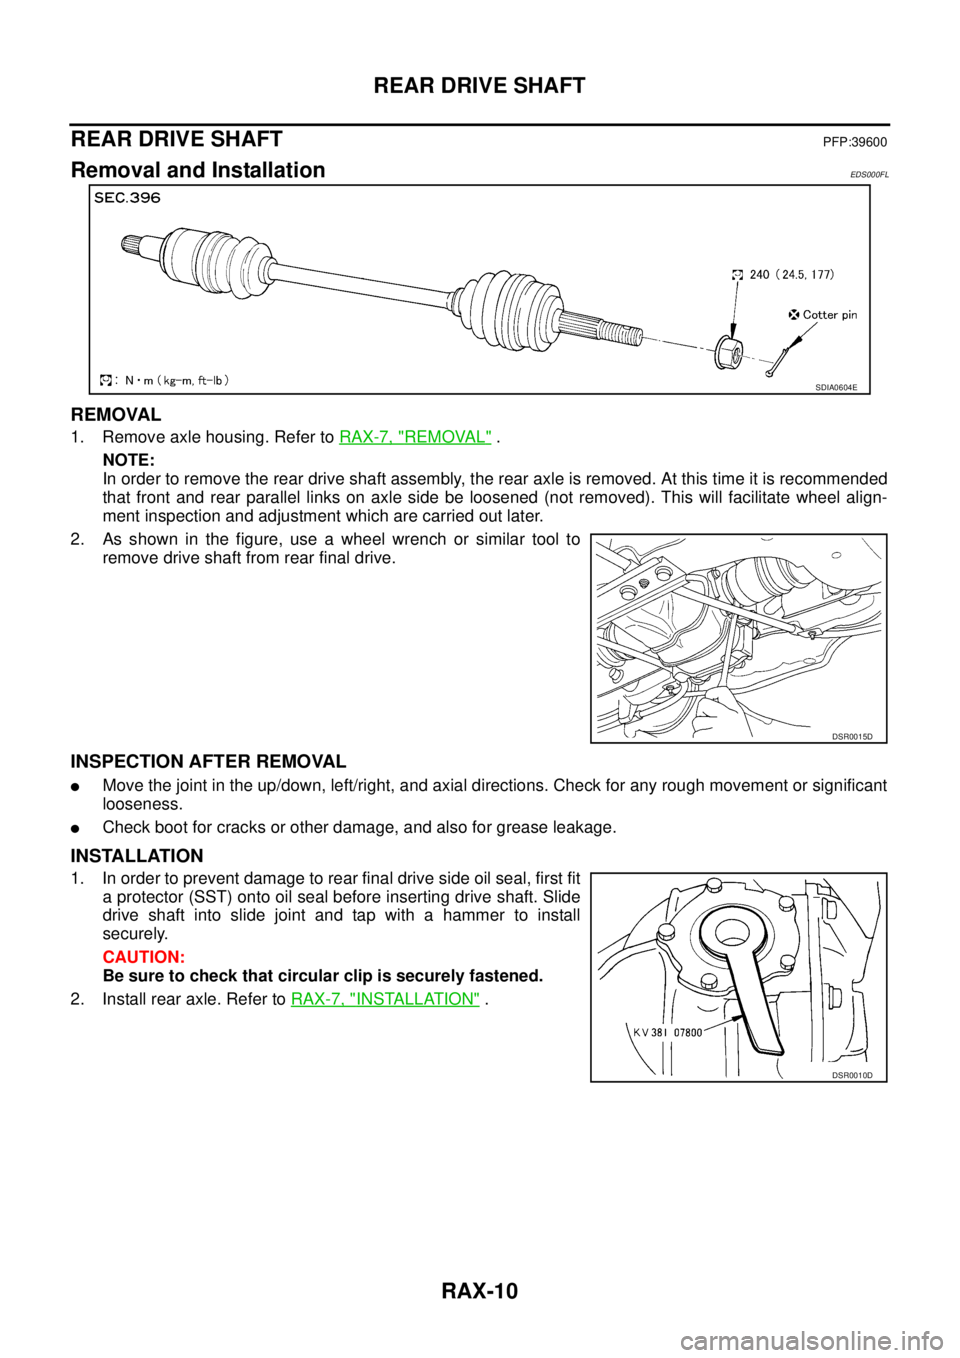 NISSAN X-TRAIL 2003  Service Repair Manual RAX-10
REAR DRIVE SHAFT
 
REAR DRIVE SHAFTPFP:39600
Removal and InstallationEDS000FL
REMOVAL
1. Remove axle housing. Refer to RAX-7, "REMOVAL" .
NOTE:
In order to remove the rear drive shaft assembly,